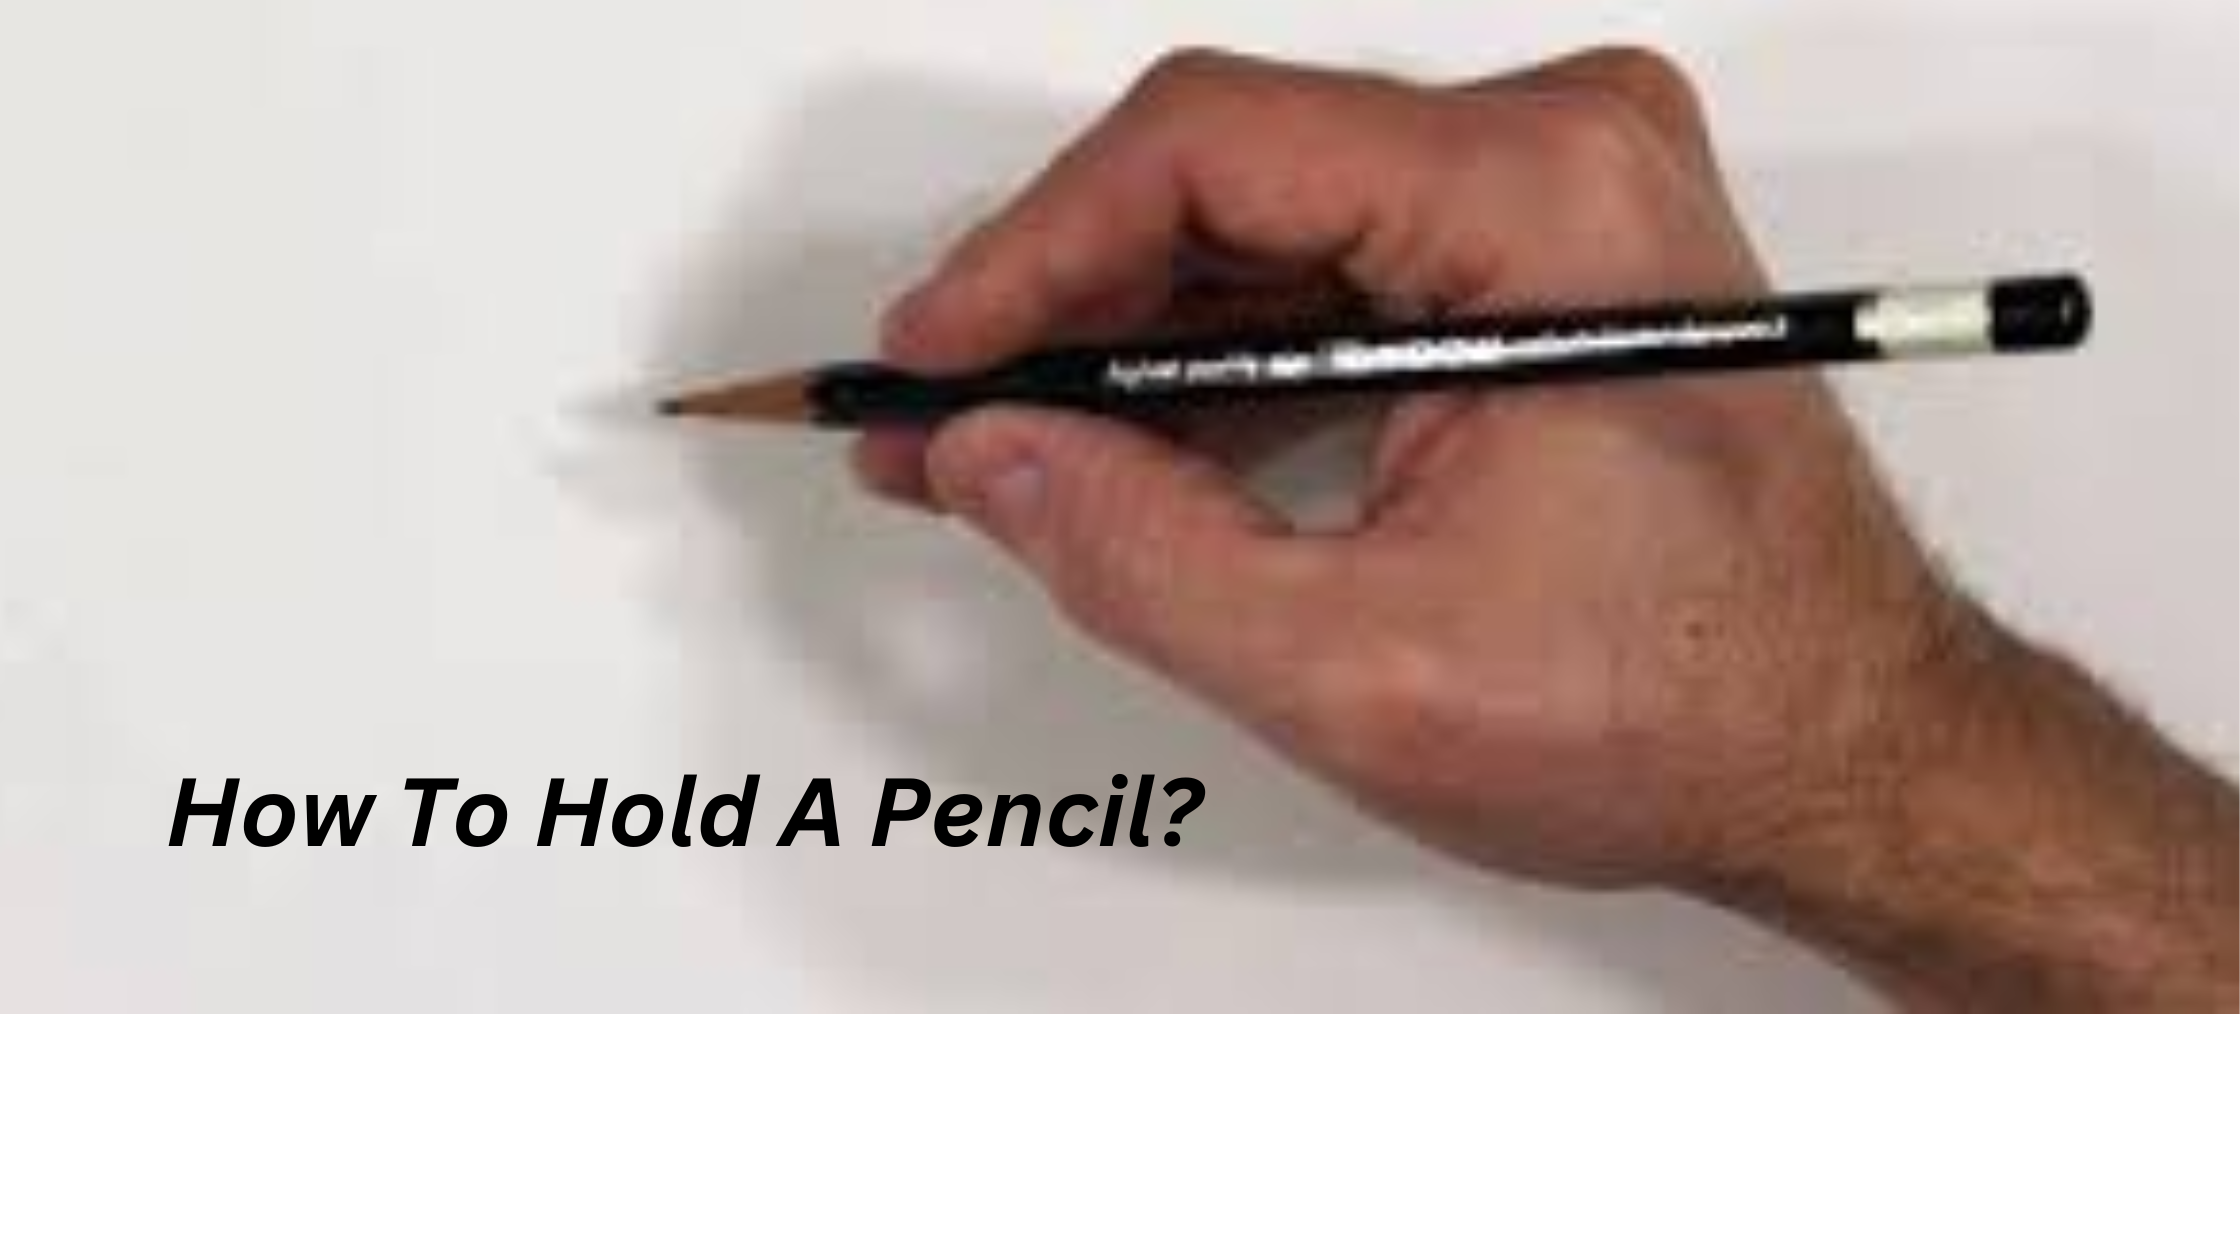 How To Hold A Pencil?